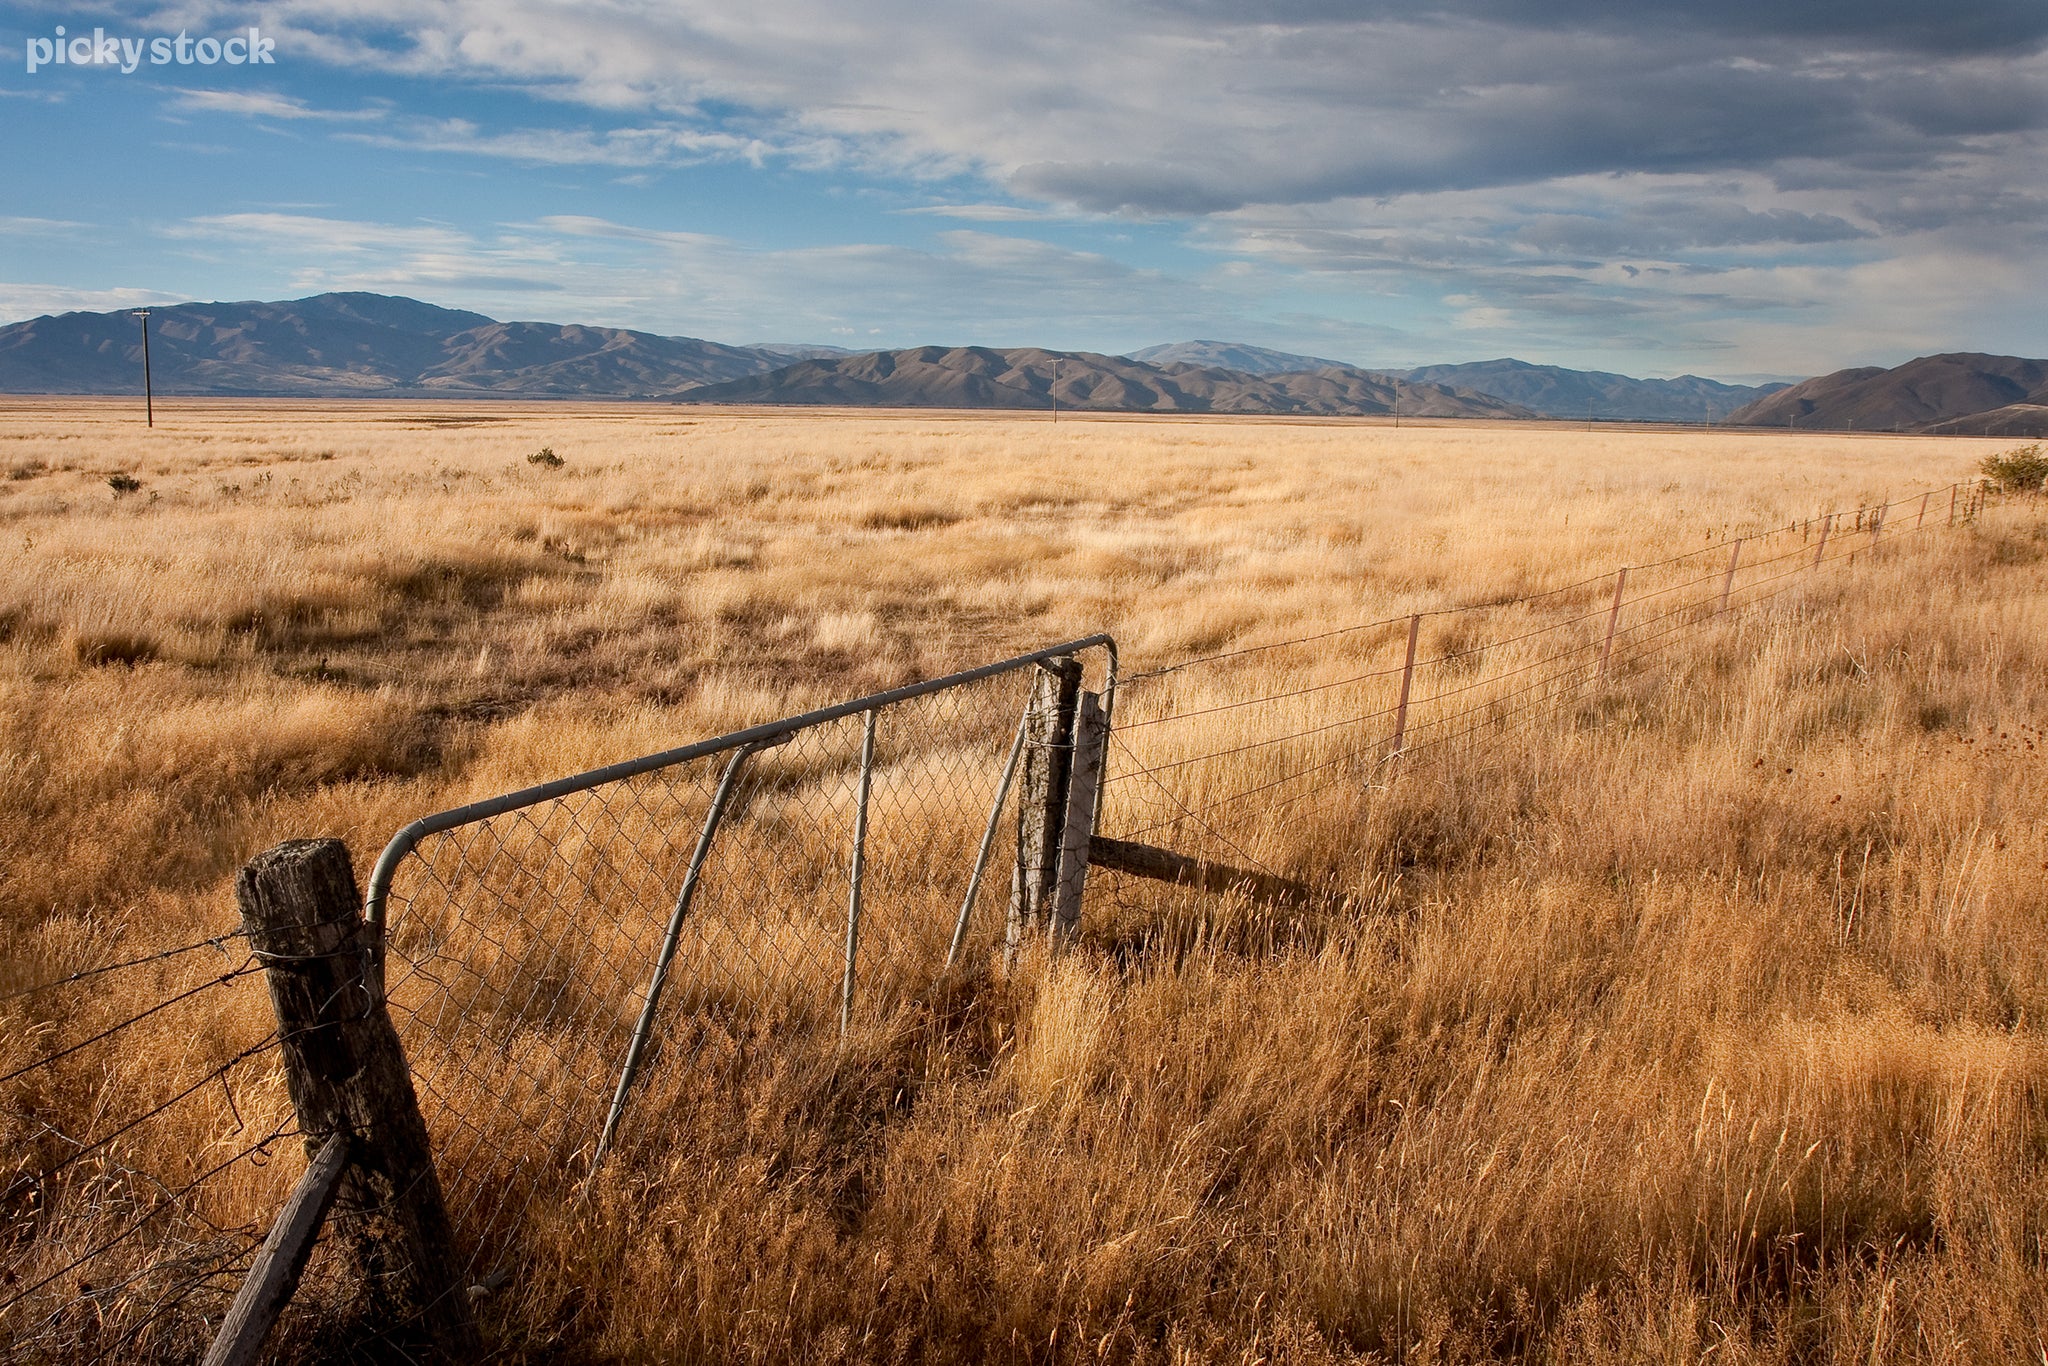 A landscape of an old wire fence and iron gate blocked access to a lush plain of golden grass. The flatlands stretch far towards a mountainous range while clouds list atop the fields.